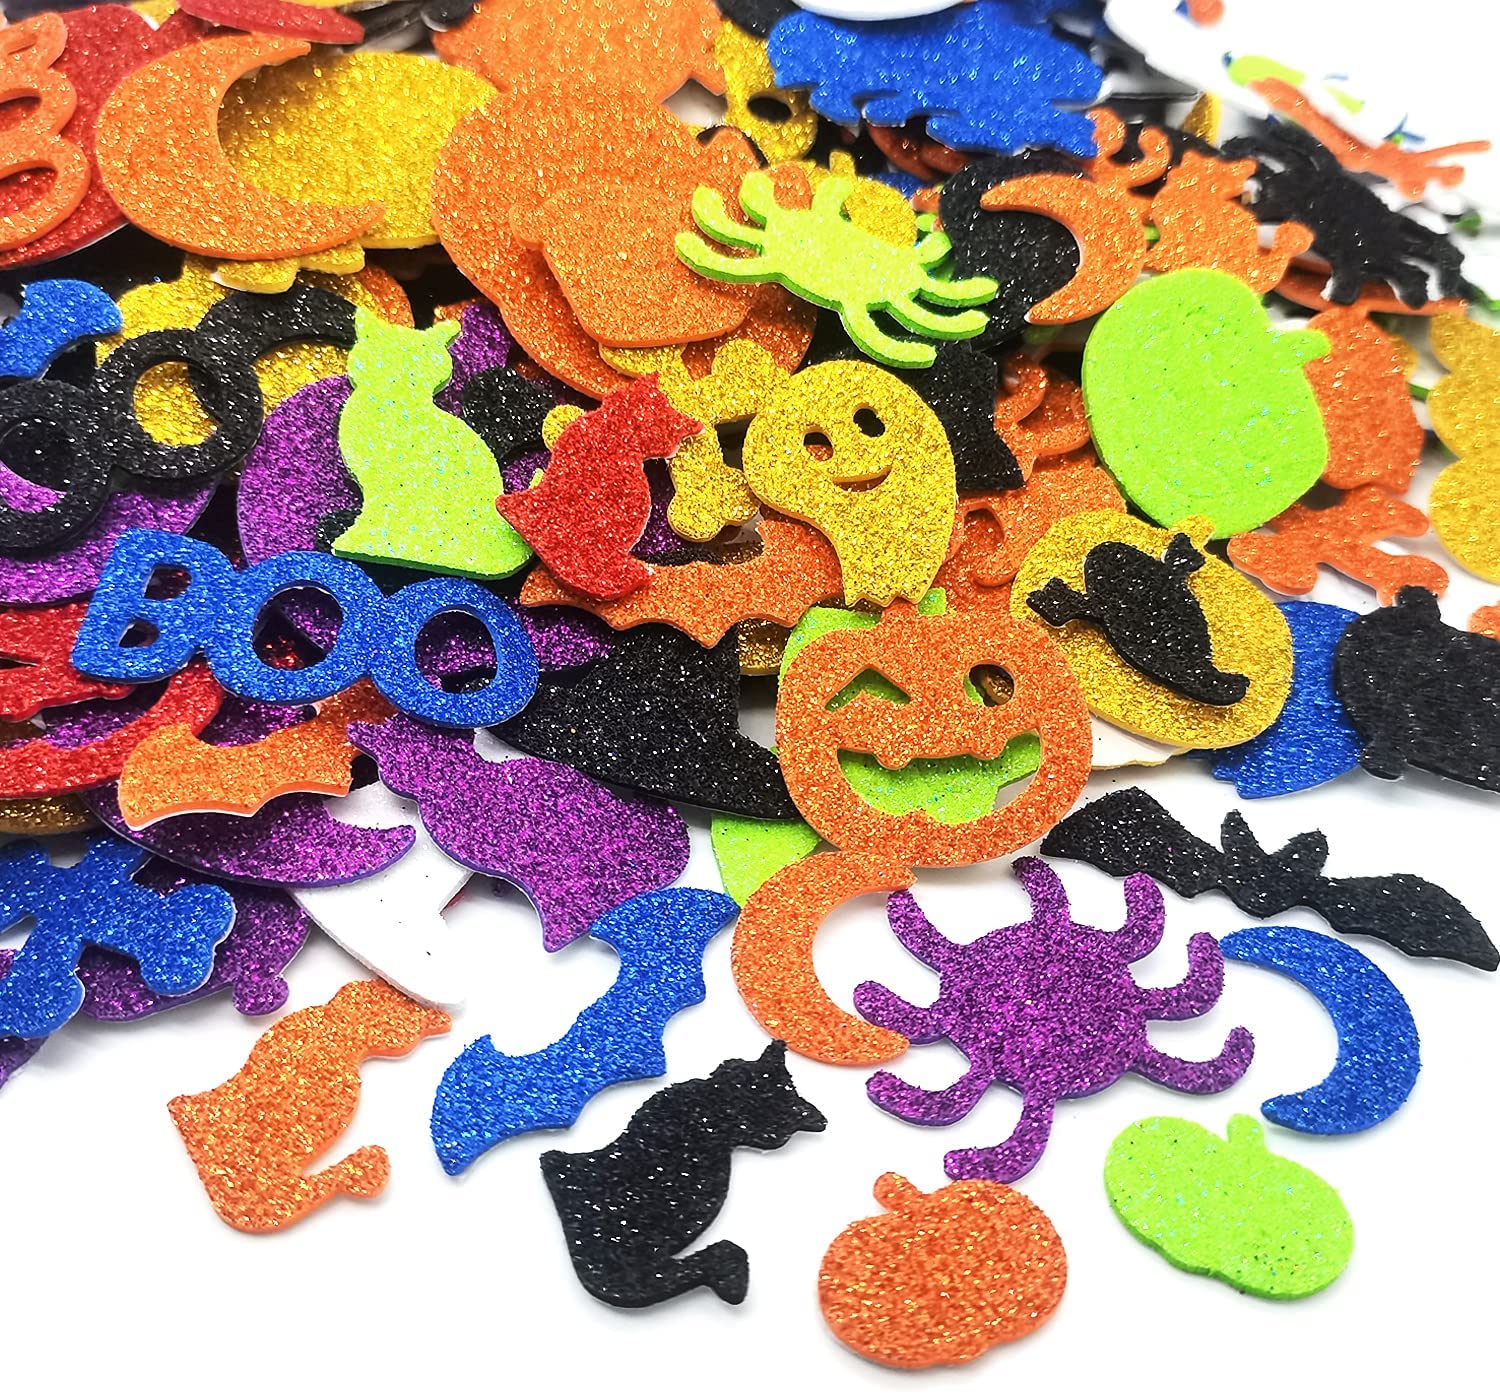 Halloween Foam Stickers Halloween Party Favors Glitter Pumpkin Stickers Self Adhesive Crafts Stickers Kid's Arts Craft Supplies Greeting Cards Scrapbooking Homemade Crafts